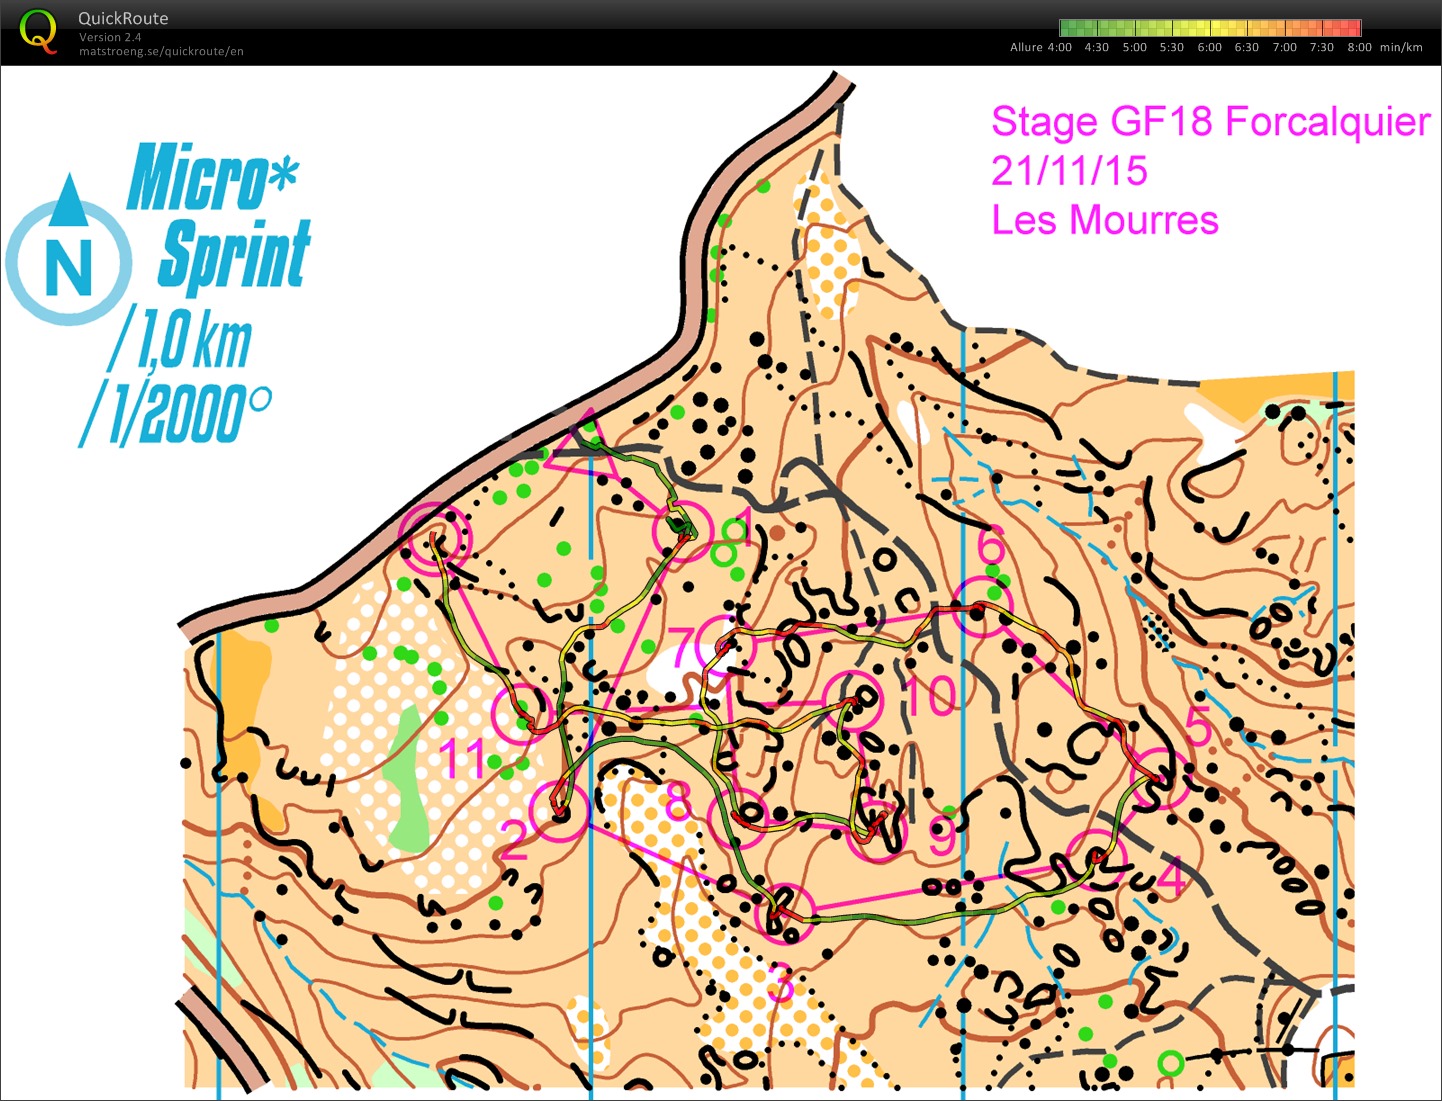 Stage gf-18 Forcalquier // microSprint (2015-11-21)